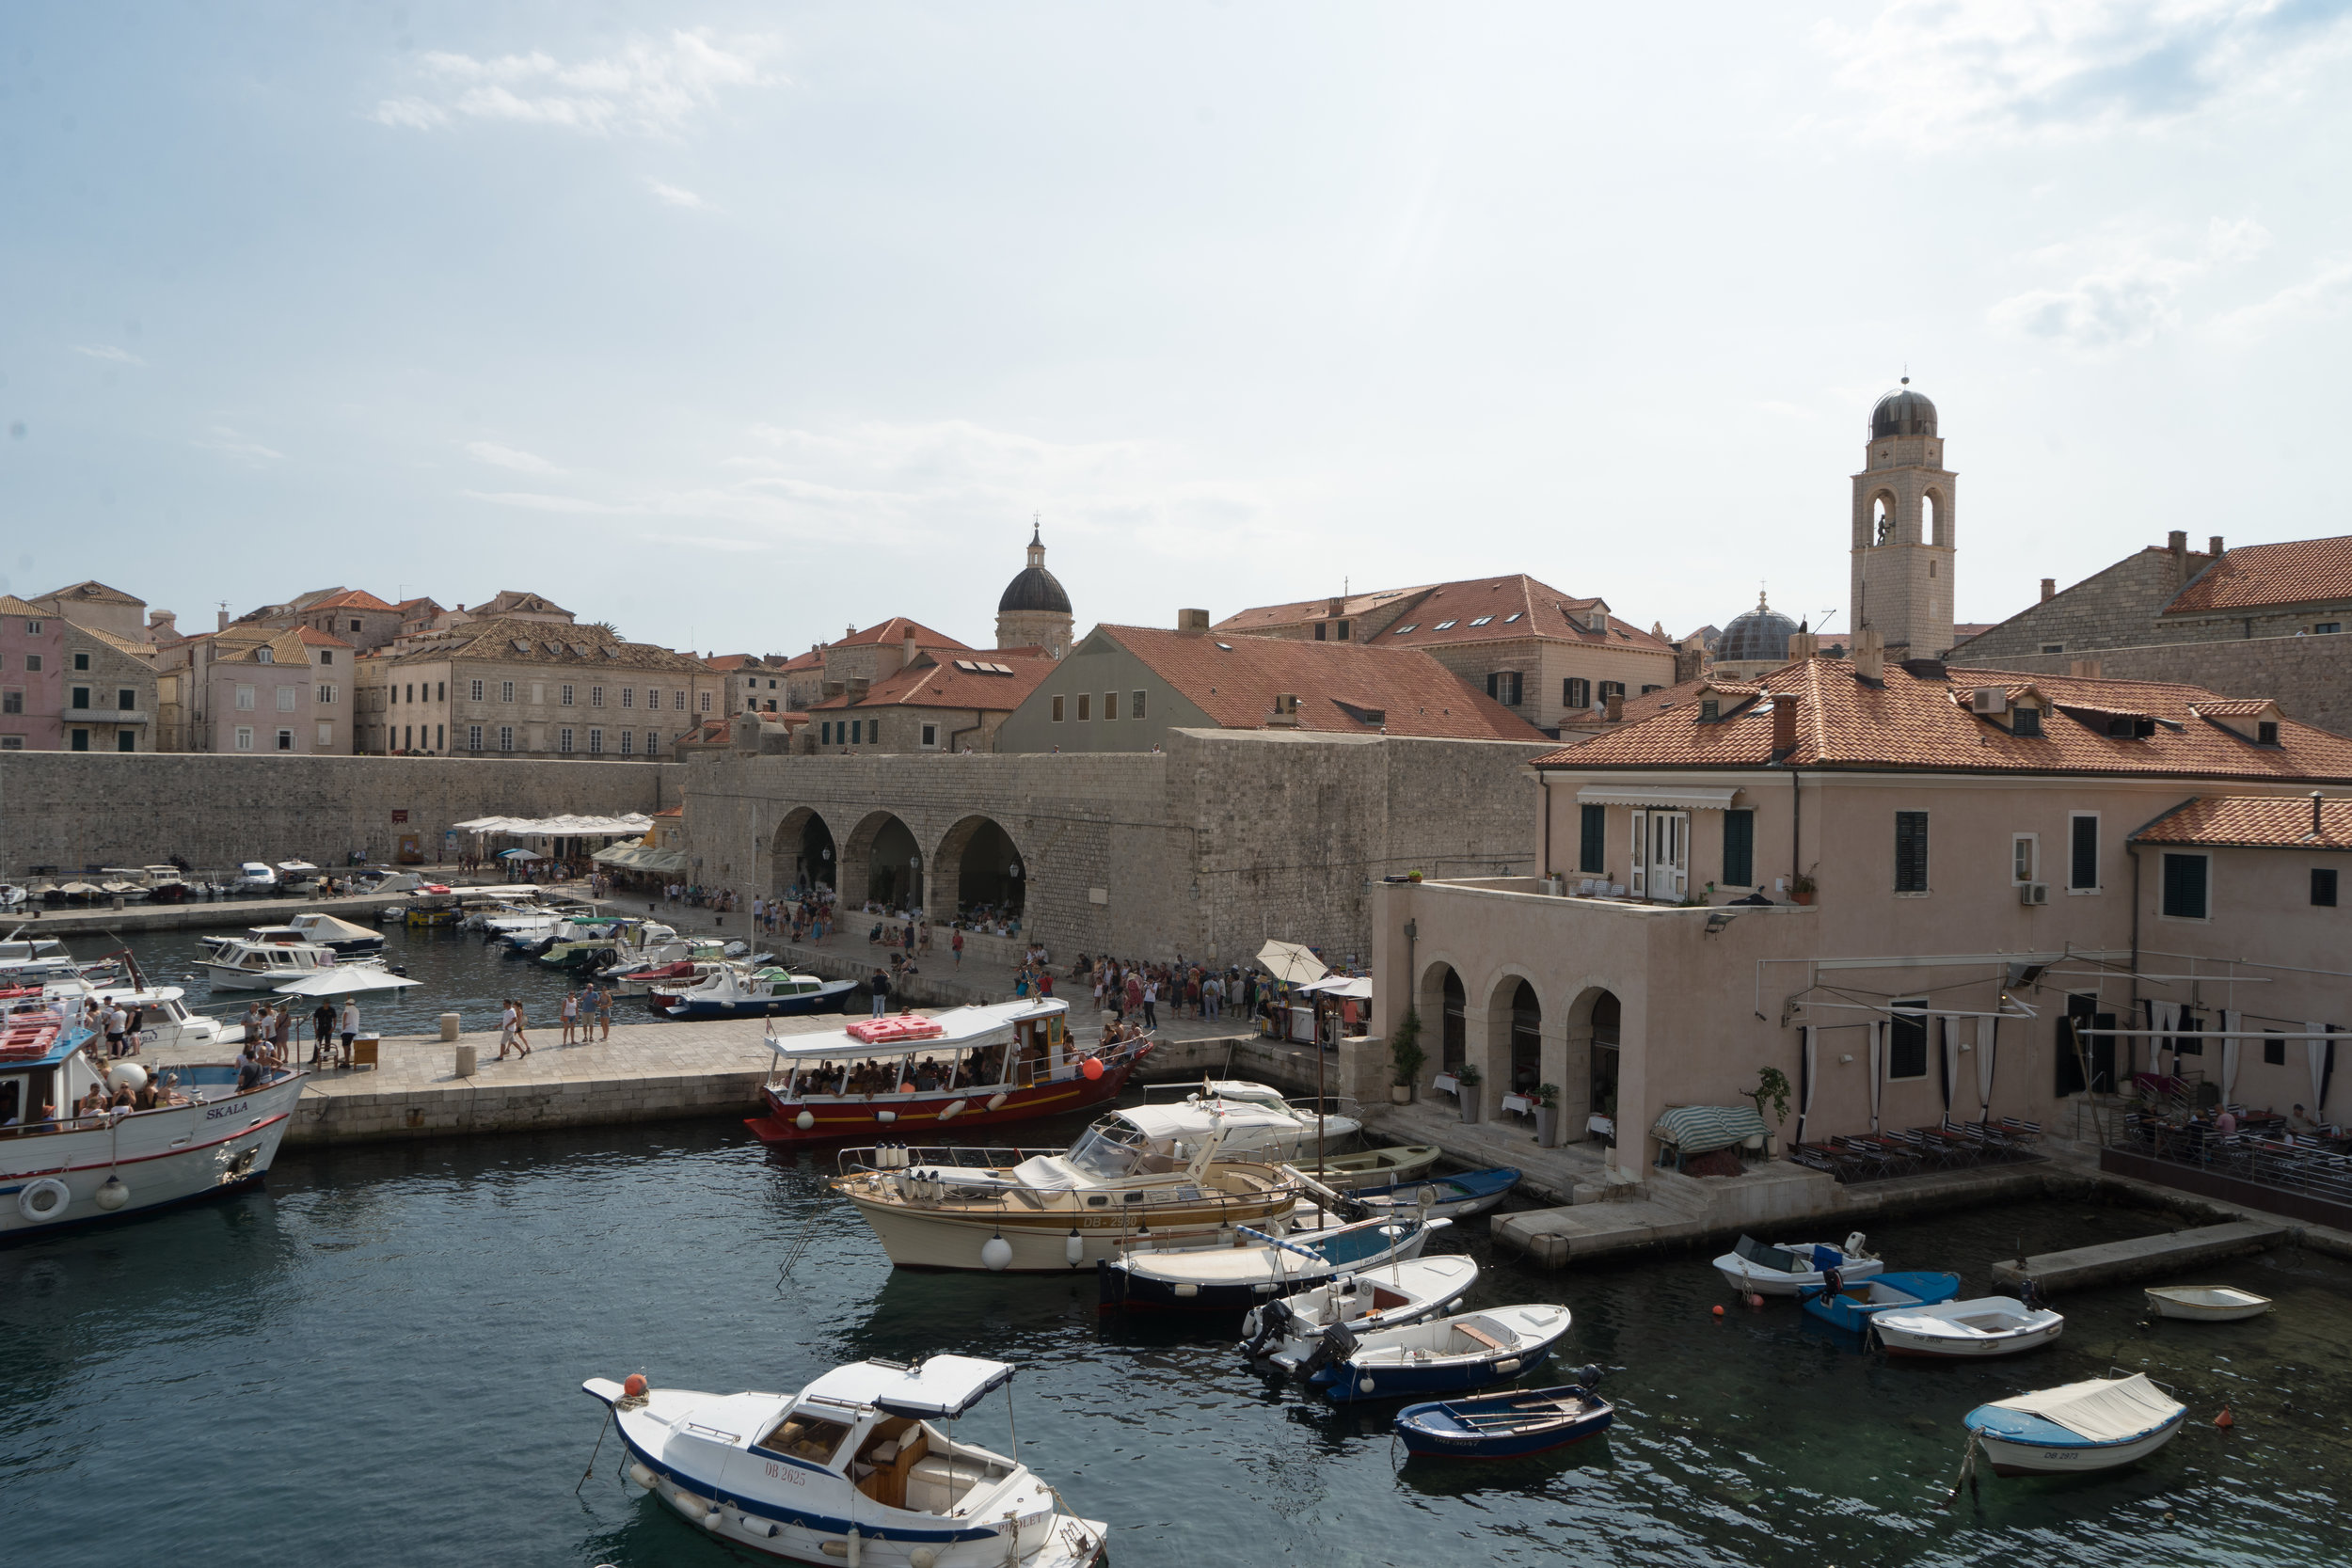  CROATIA: THE BEST THINGS TO DO IN DUBROVNIK 